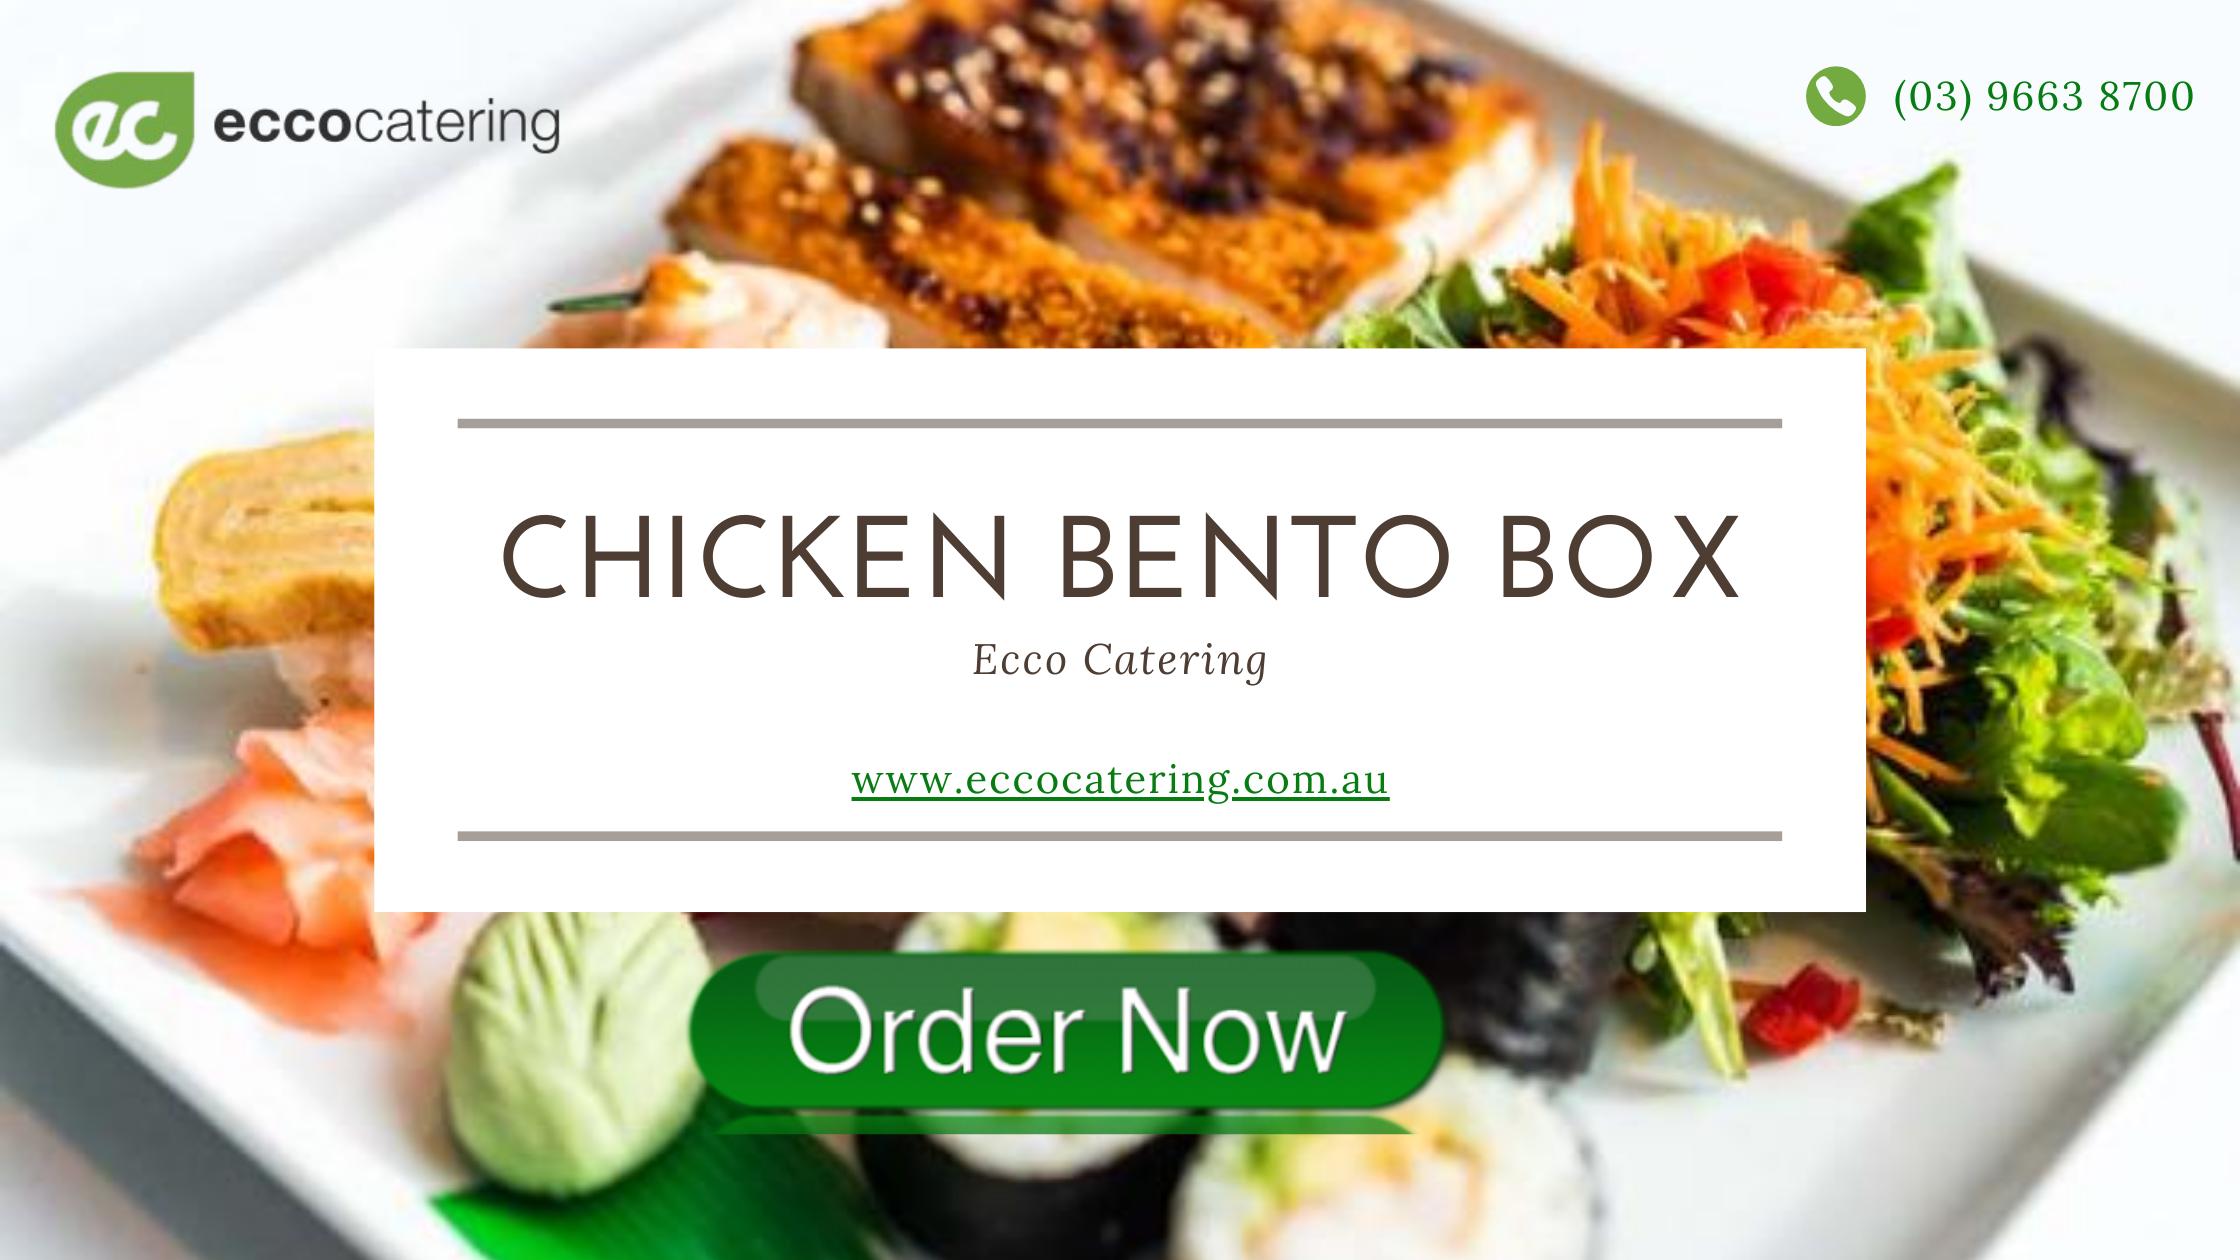 Ecco Catering | cafe | 8 Nicholson Street, East Melbourne, VIC 3002, Australia | 0396638700 OR +61 3 9663 8700